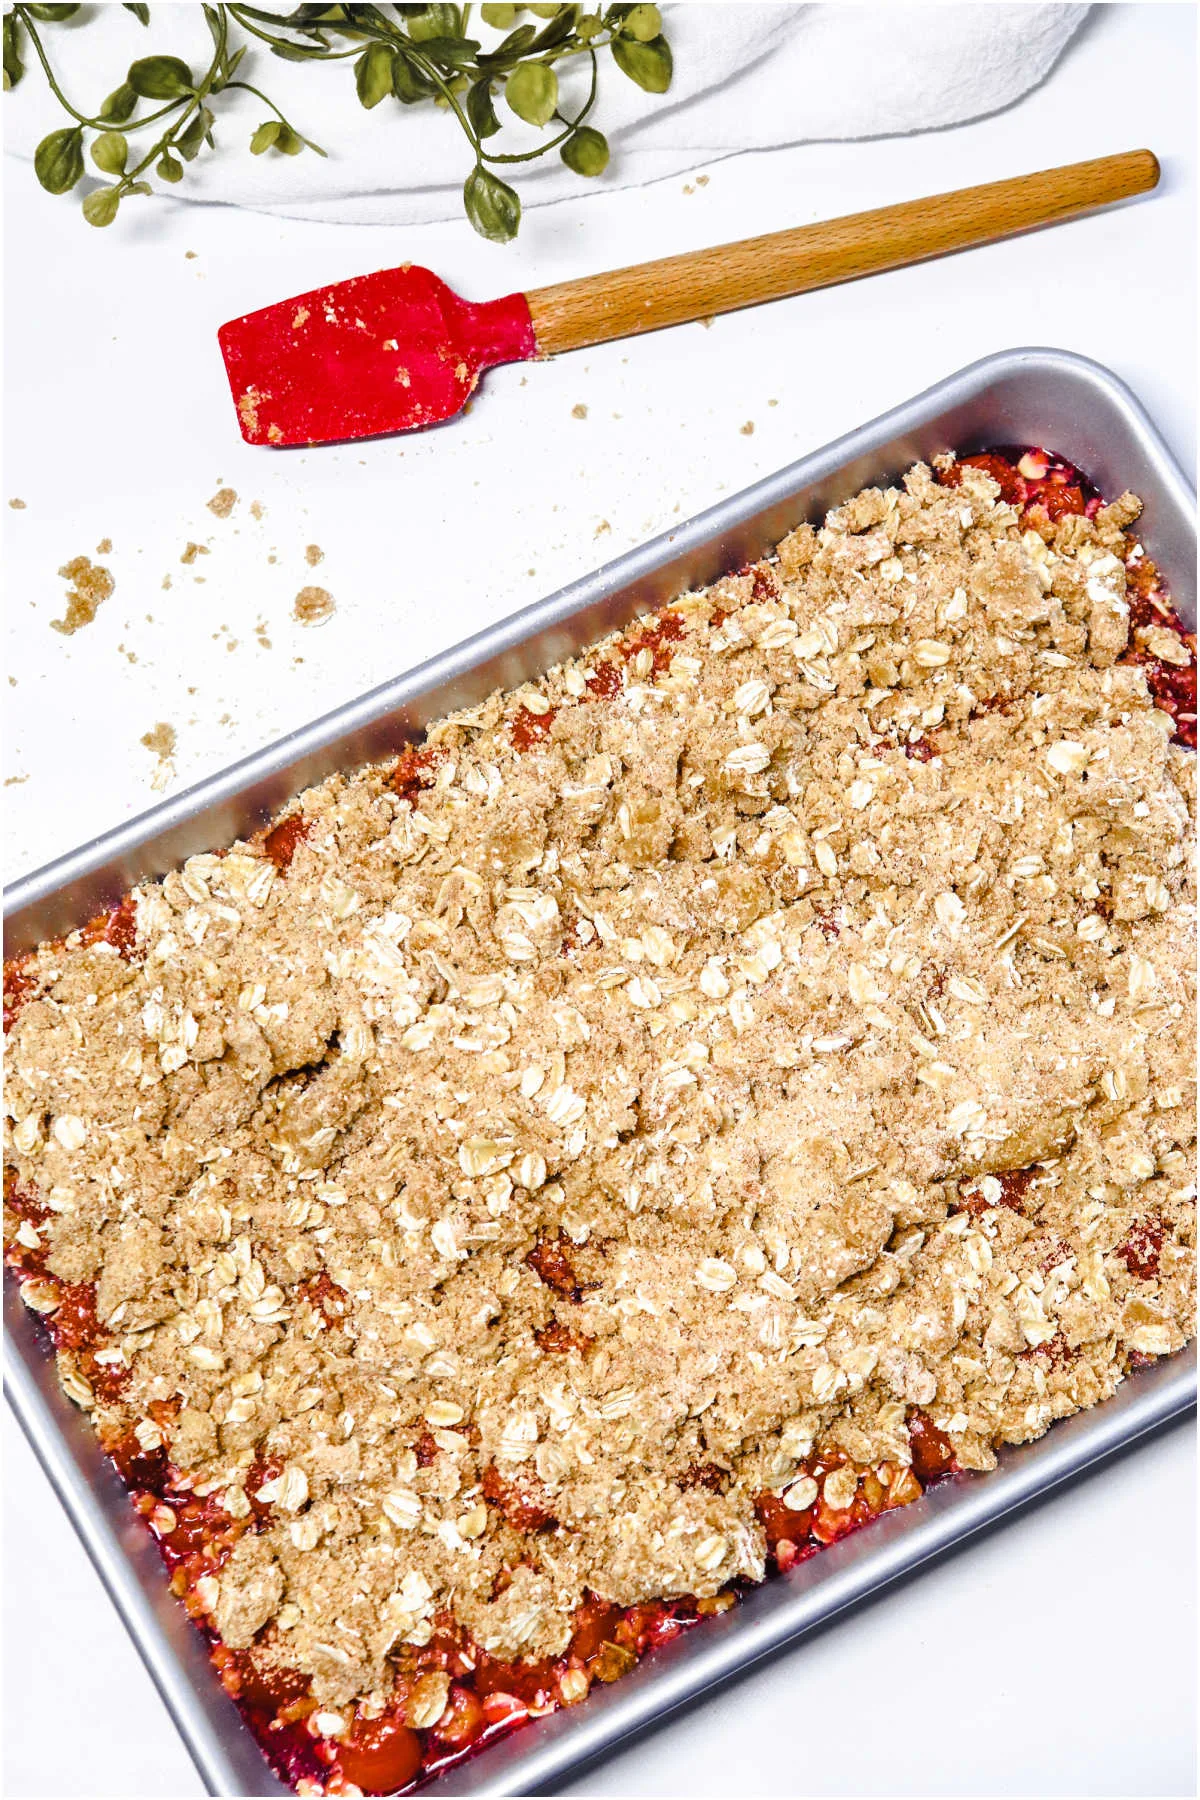 Oat crumbles sprinkled on top of cherry crisp